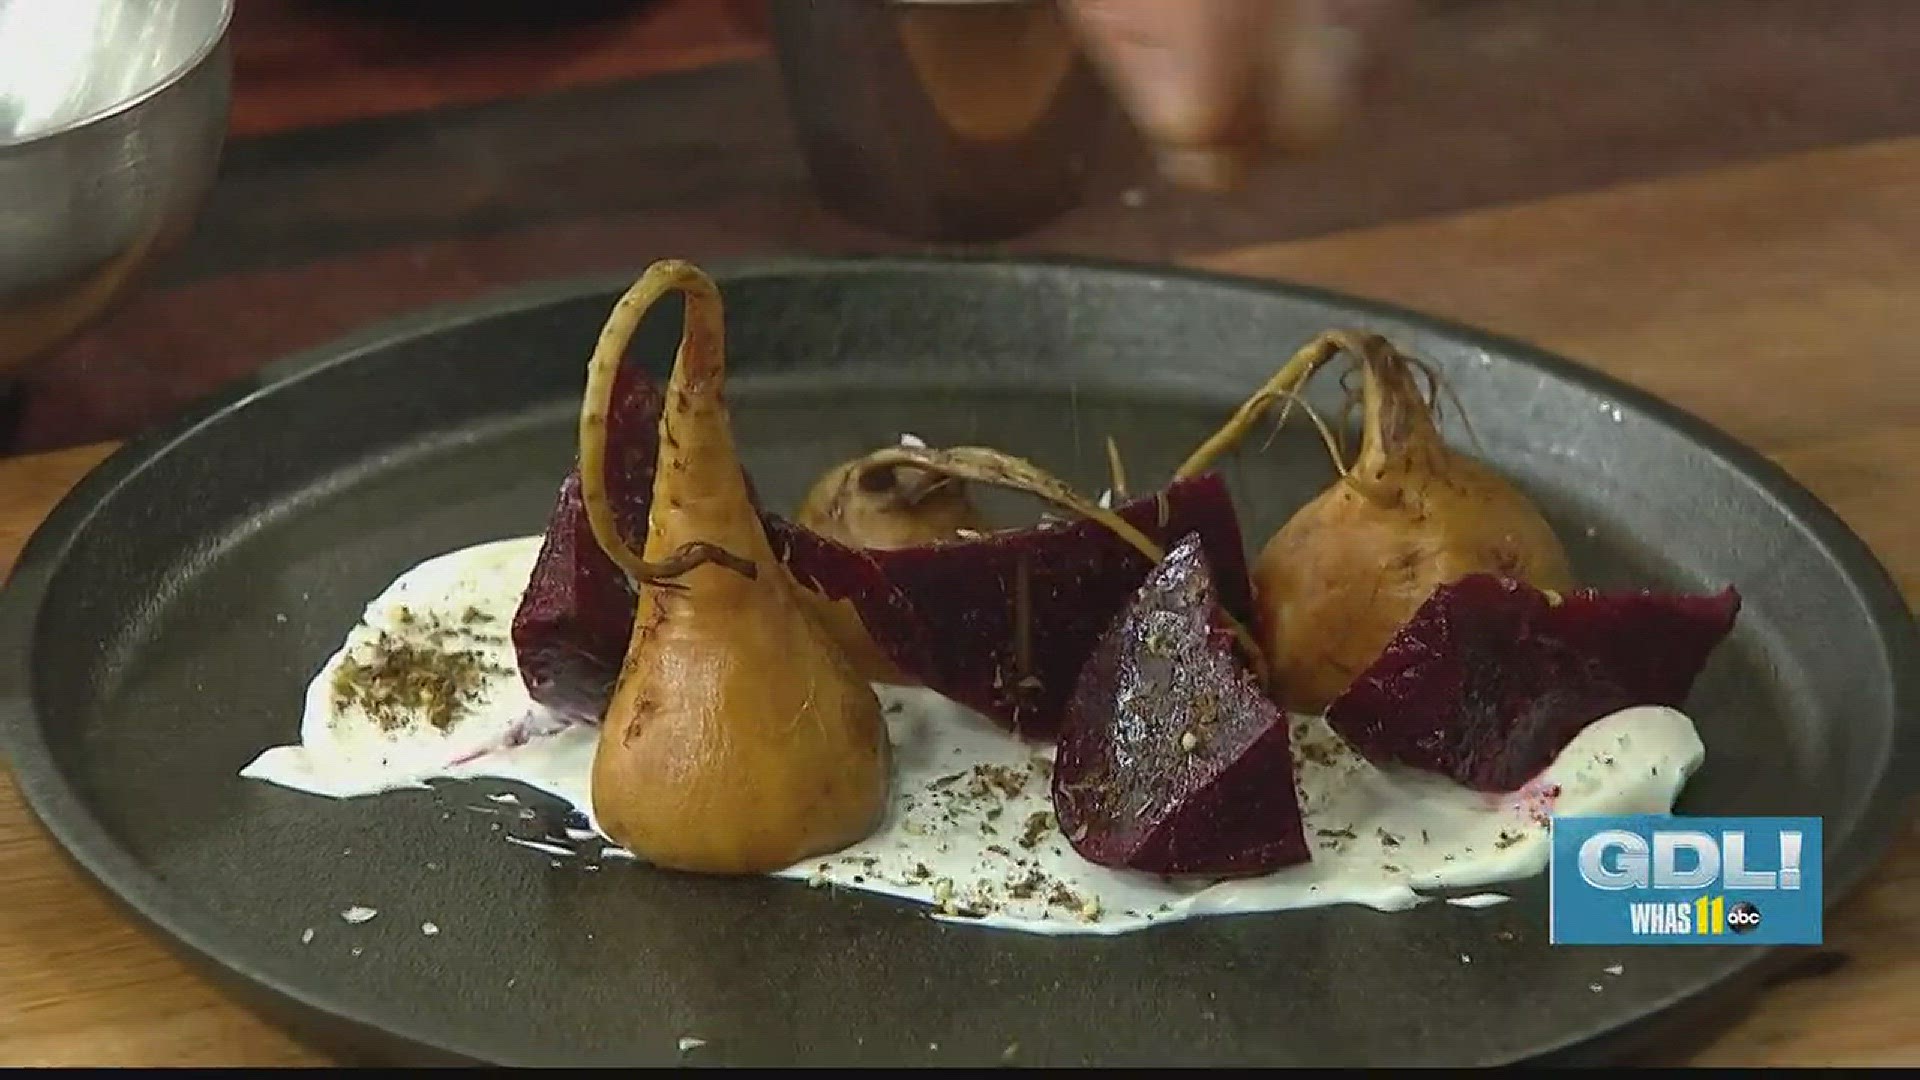 Mike Wajda from Proof on Main makes a beautiful beet dish that tastes as good as it looks.